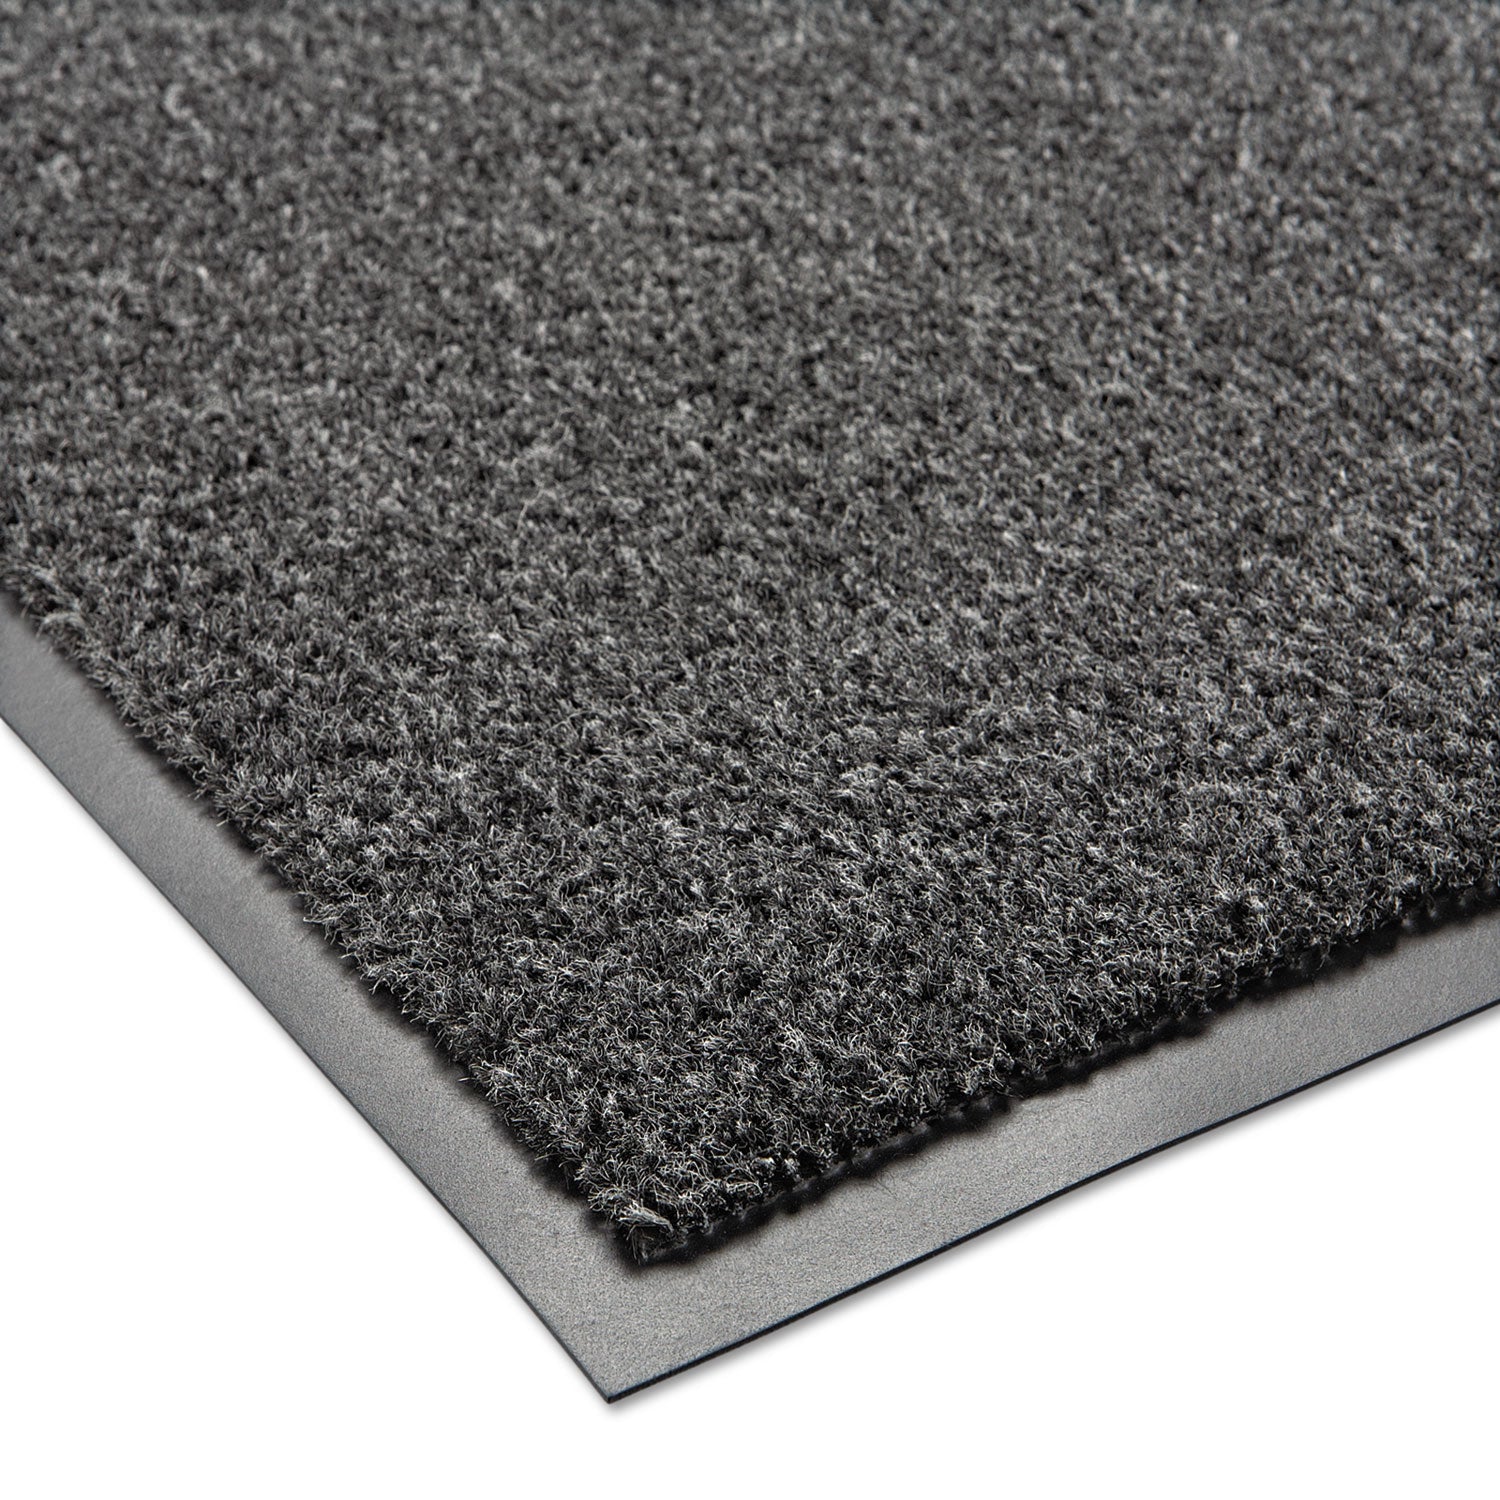 Rely-On Olefin Indoor Wiper Mat, 36 x 60, Charcoal - 